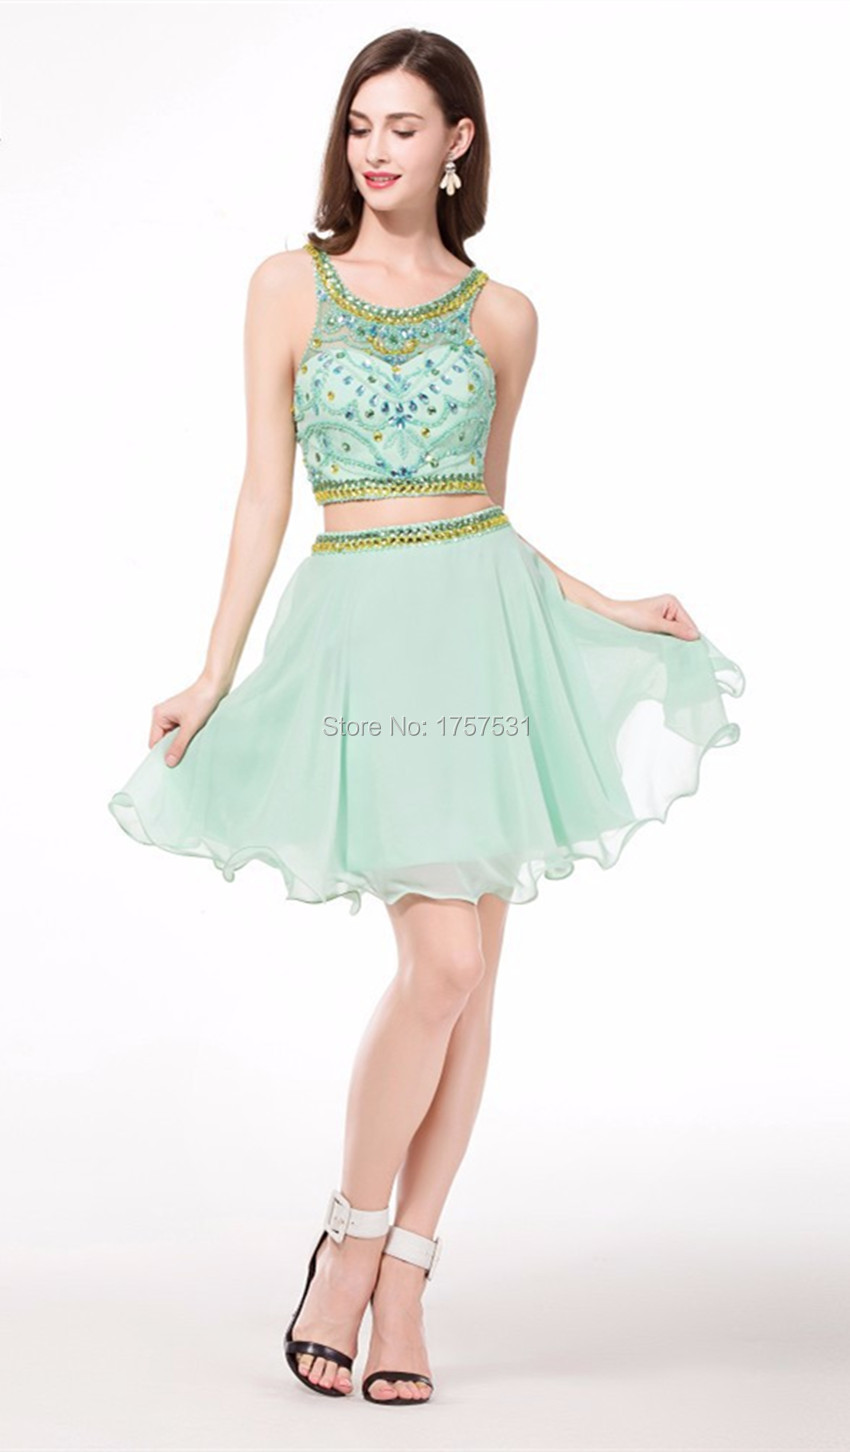 Formal Dresses And Teen Clothing 70